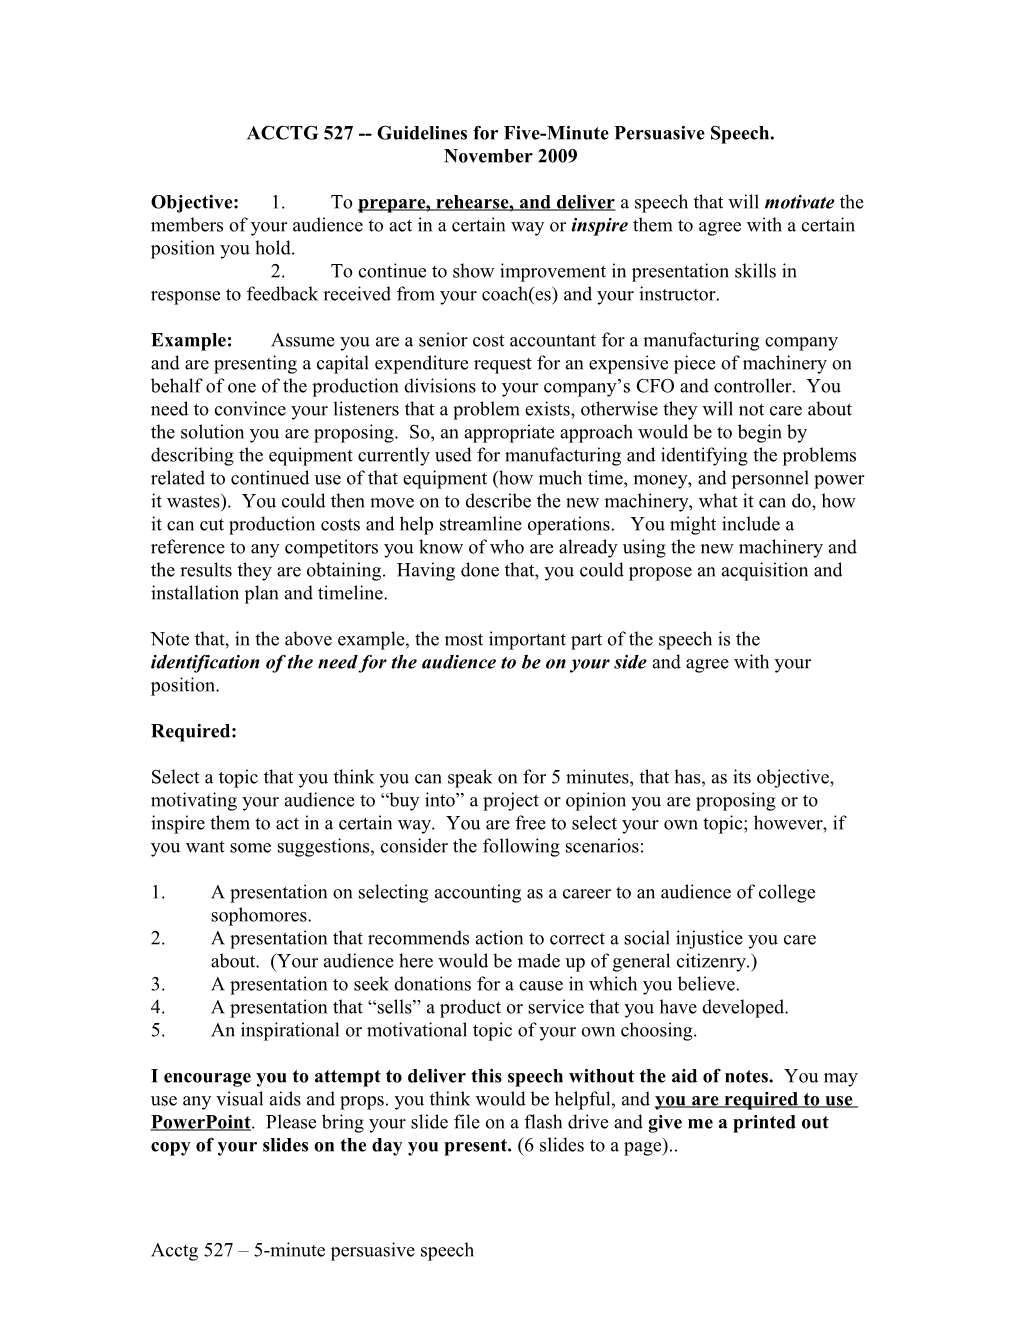 ACCTG 527 Guidelines for 5-Minute Persuasive Speech